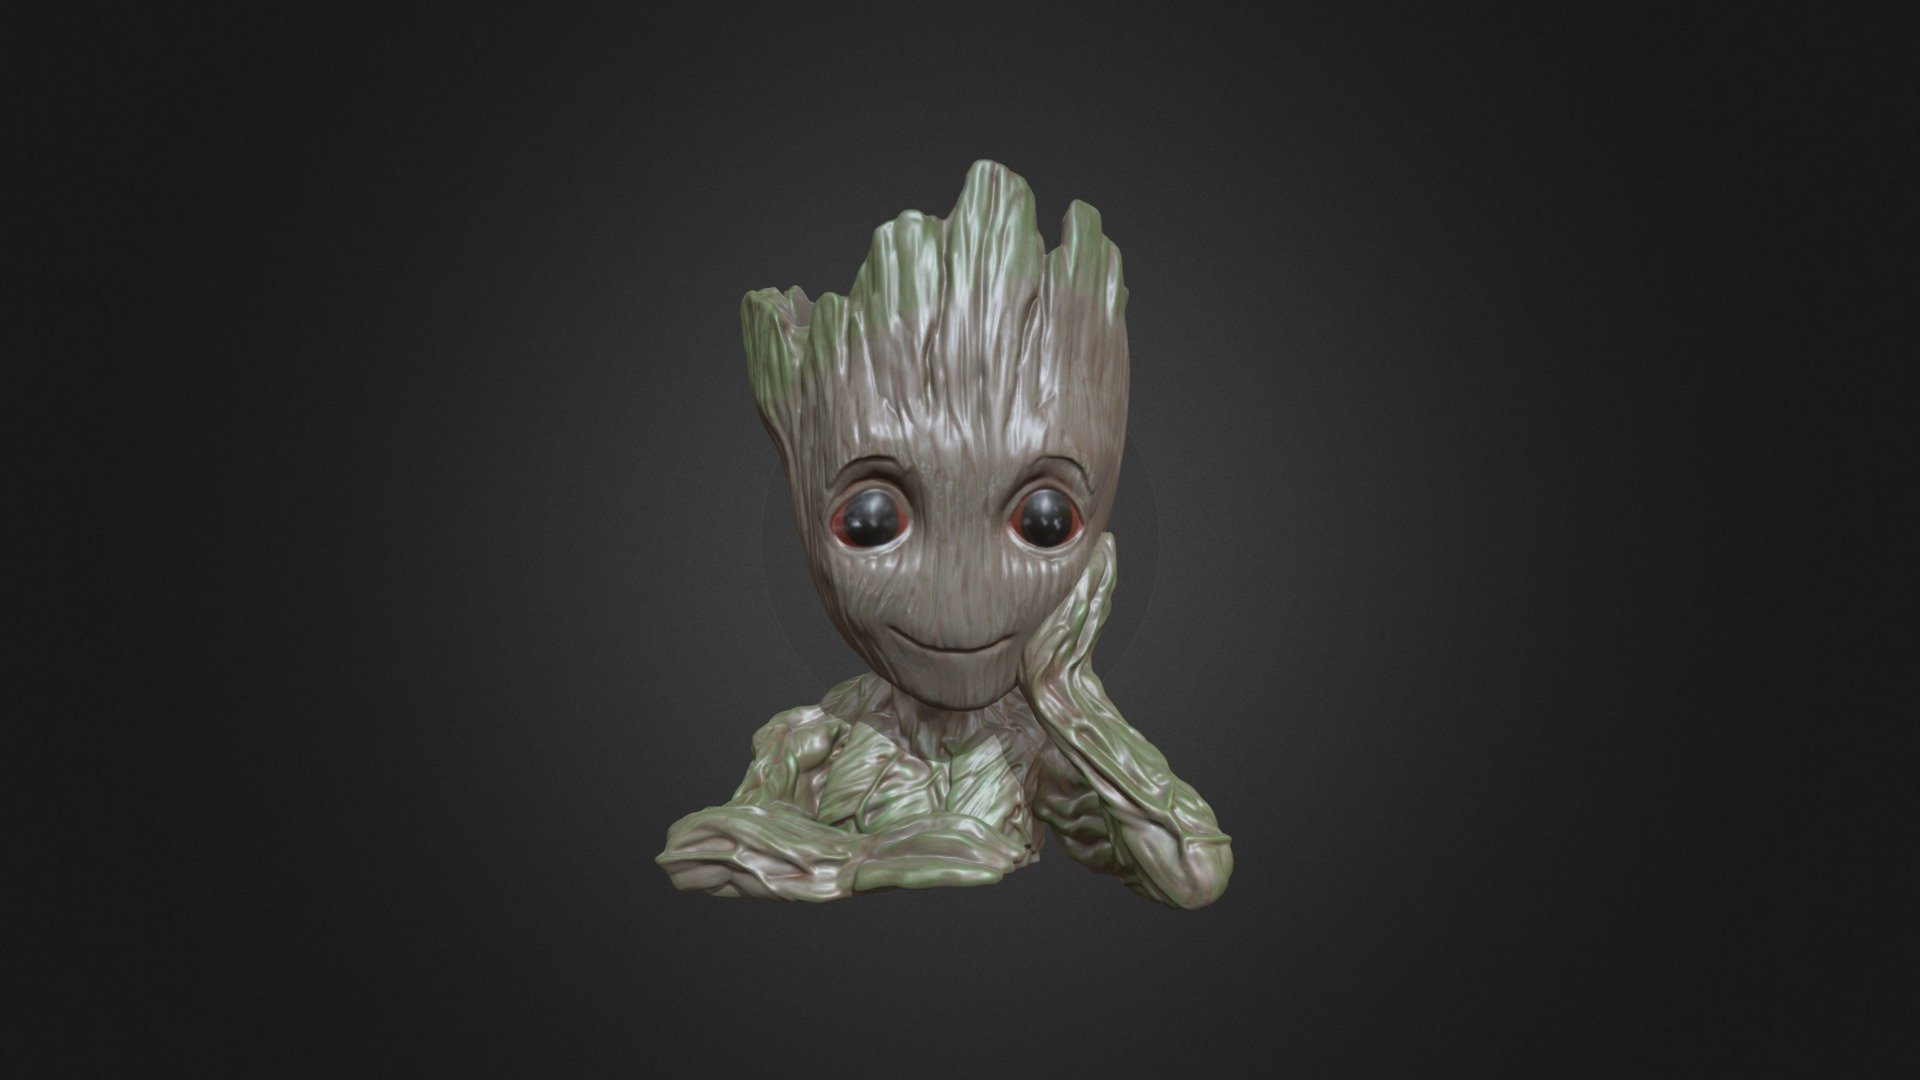 Groot (Structured Light, Textured)